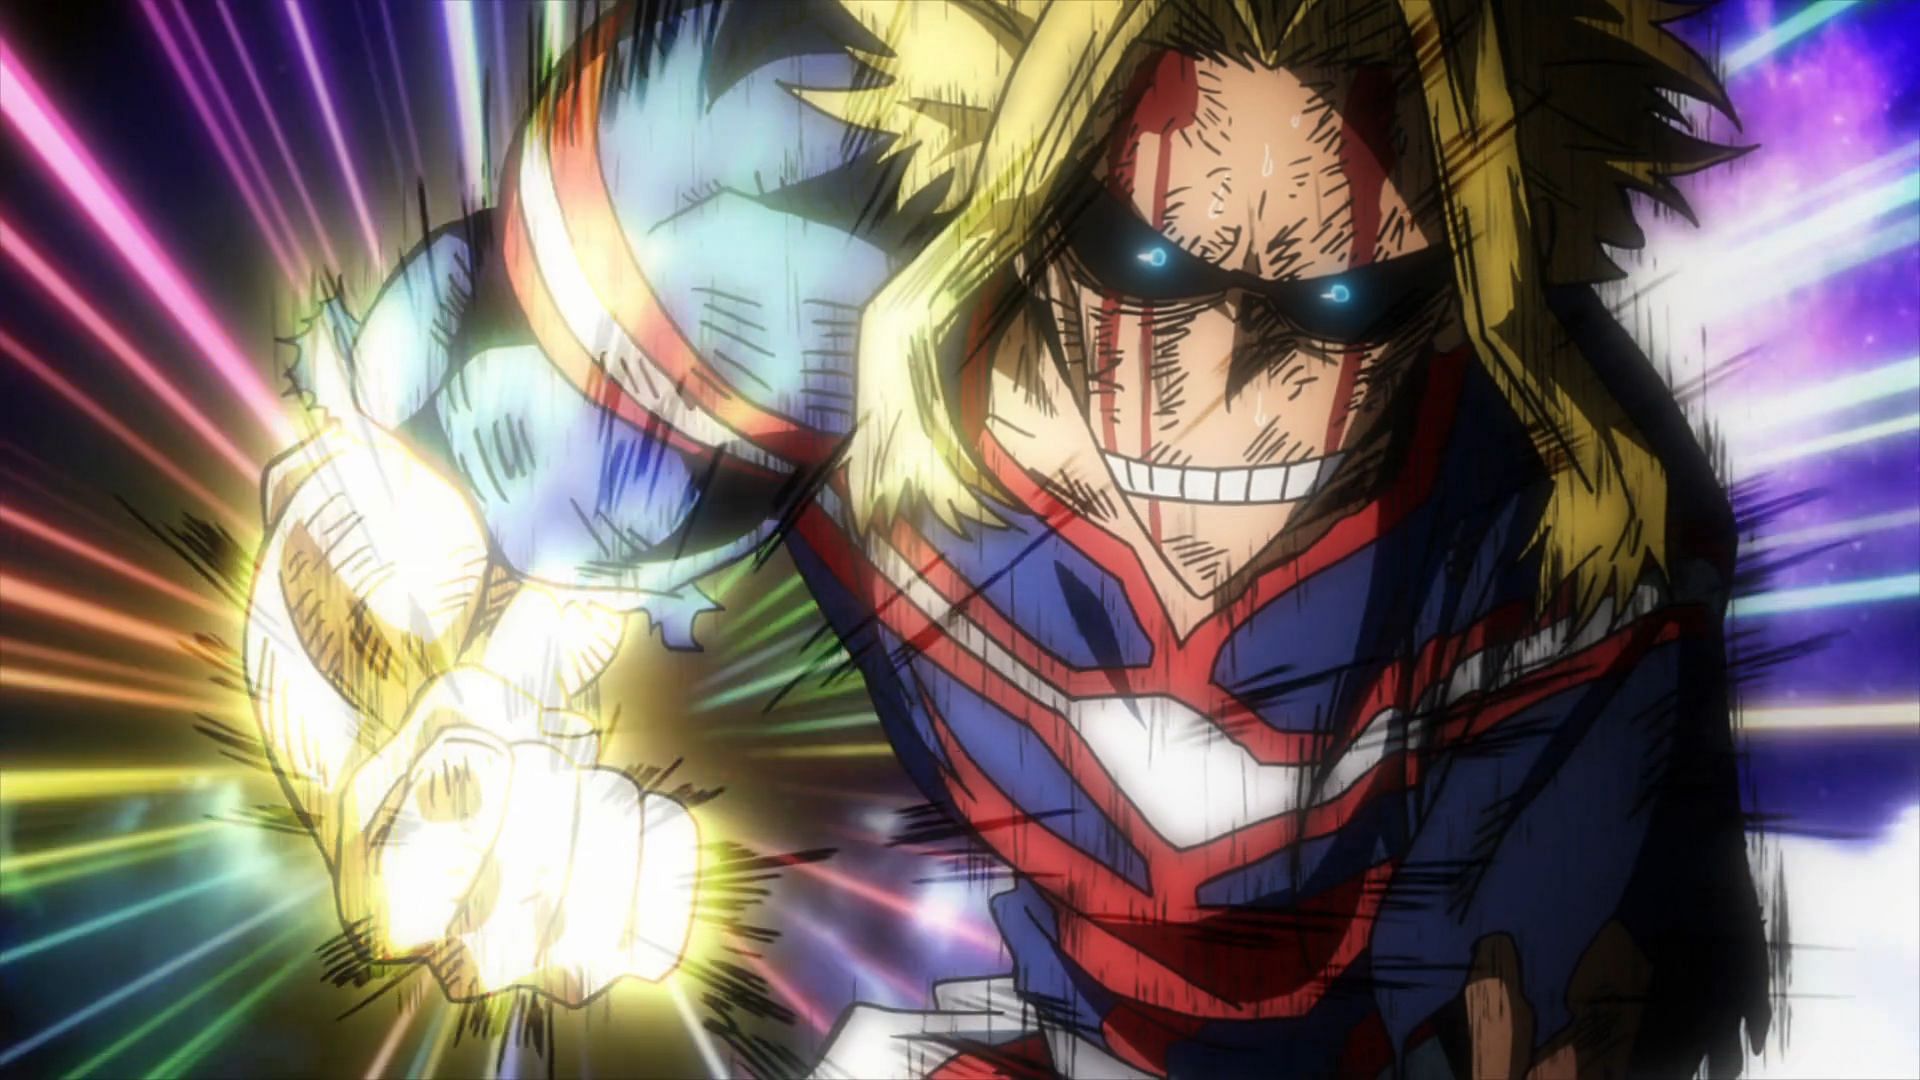 A half-transformed All Might prepares for the final blow against All for One (Image via Bones Studio)